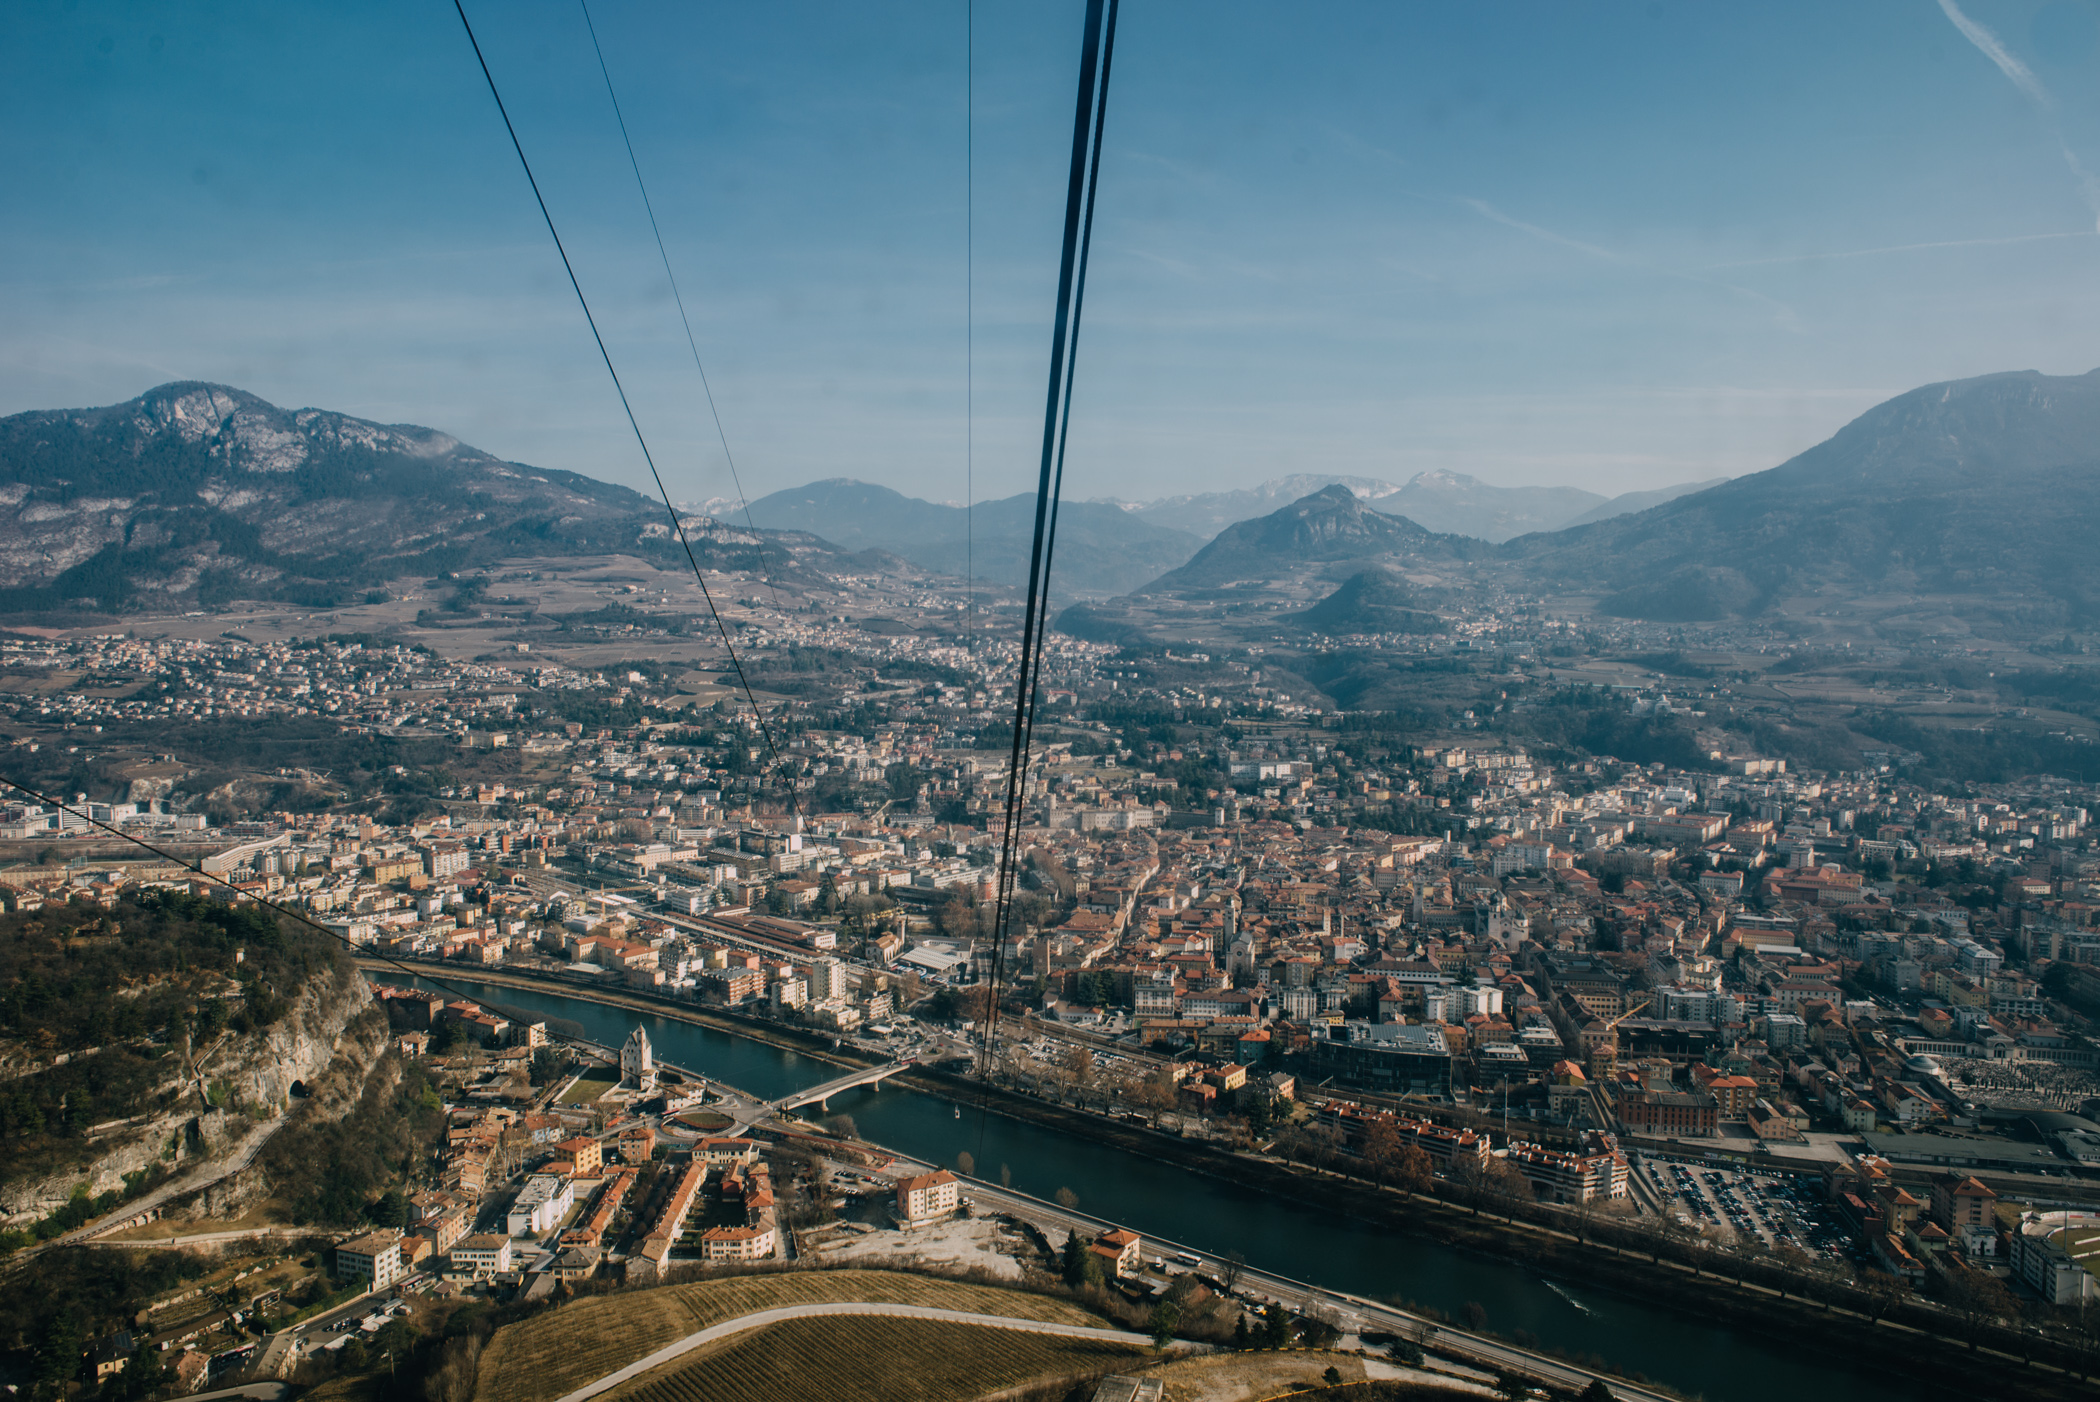 Looking back at Trento.